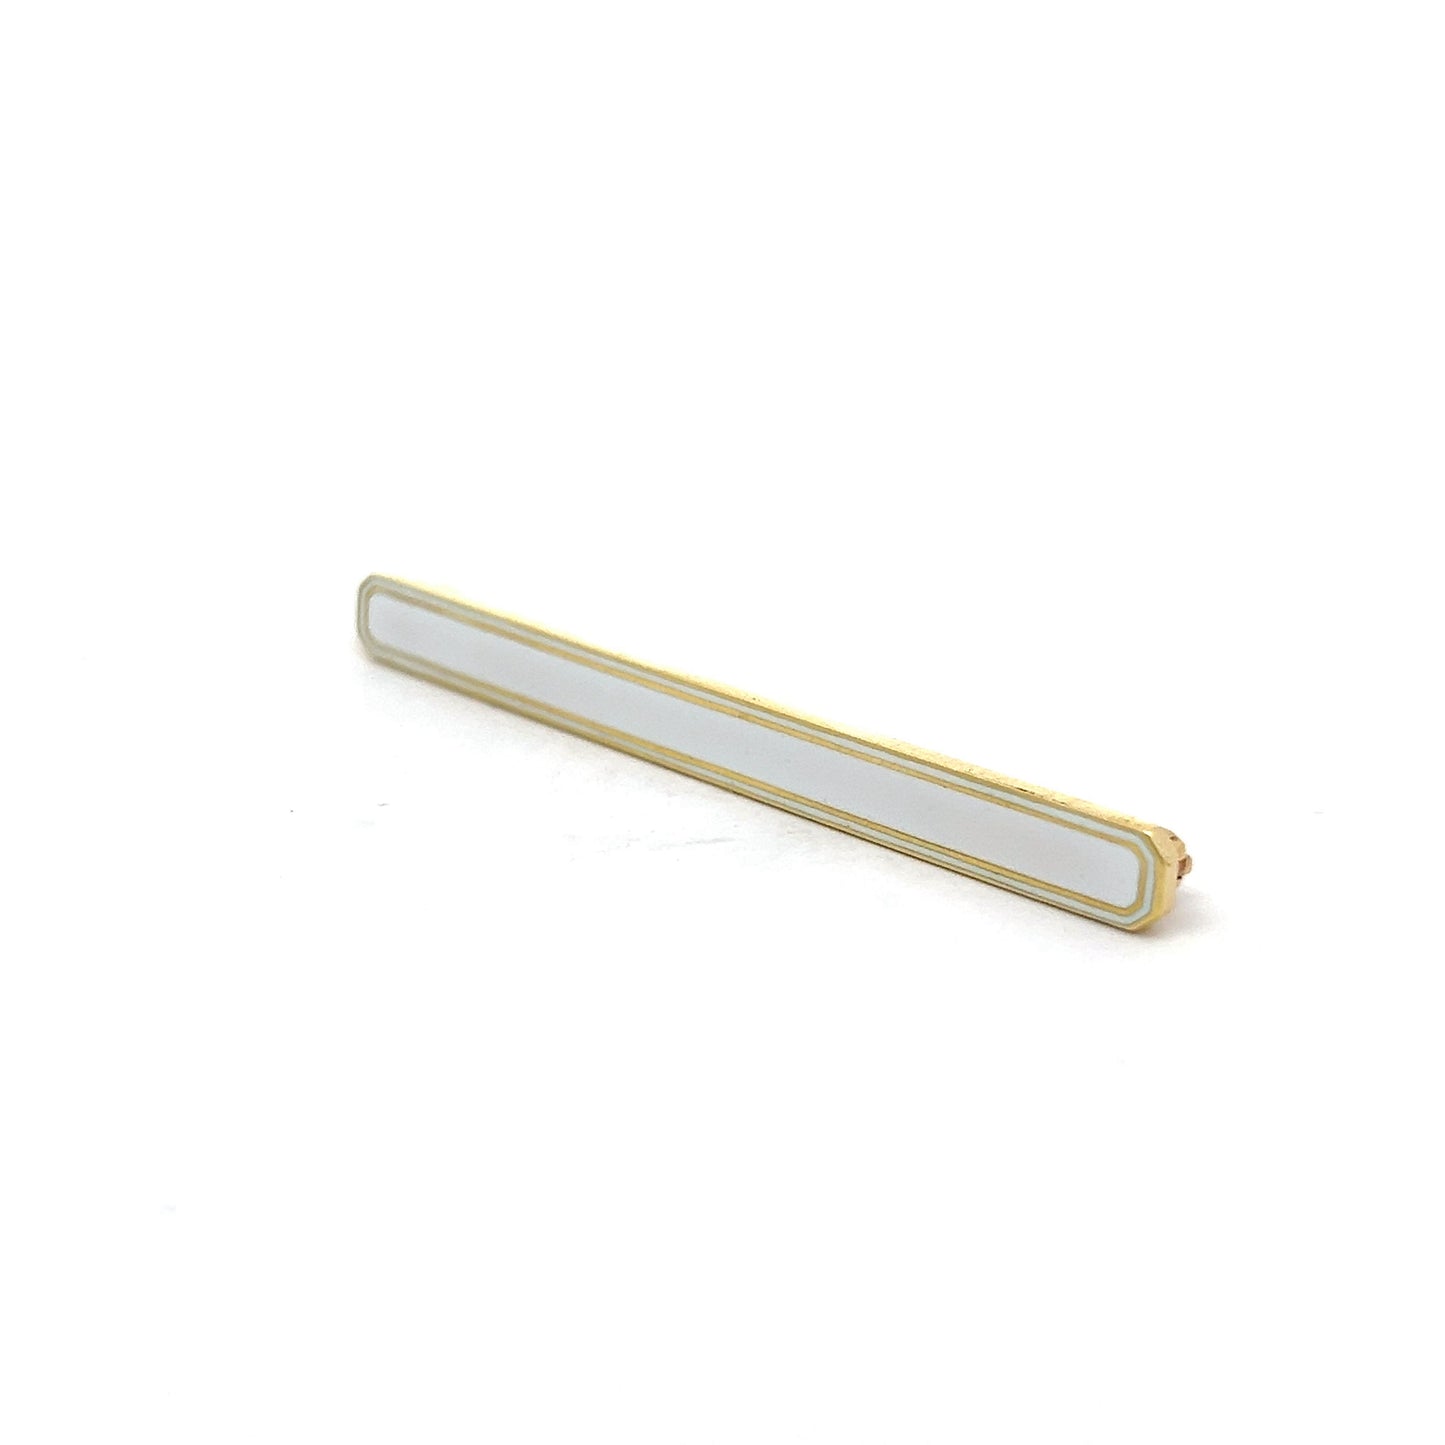 Vintage 1950's Bar Brooch in 14k Yellow Gold